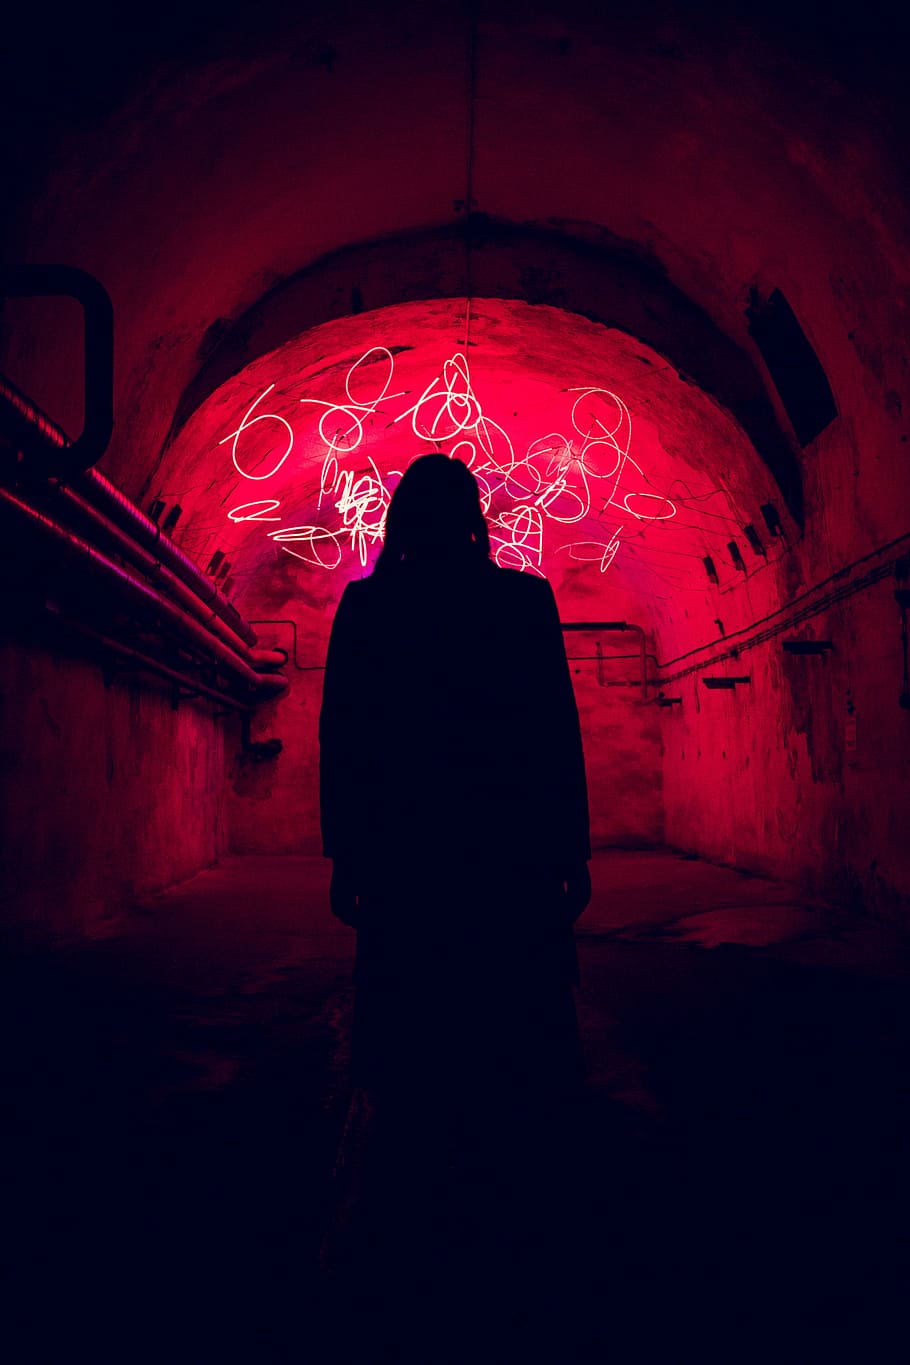 In front of chaos, silhouette of person standing inside tunnel, HD wallpaper